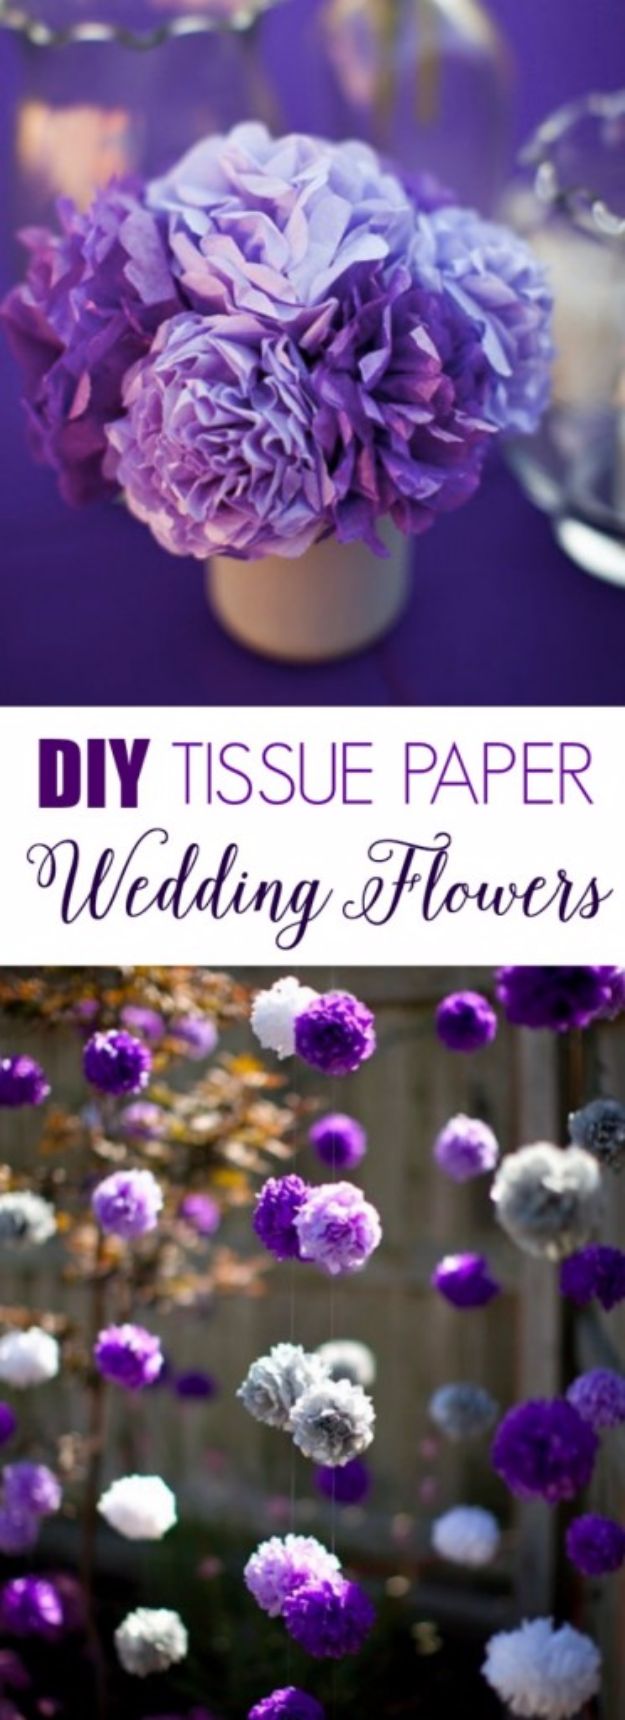 DIY Wedding Decor - DIY Tissue Paper Flowers - Easy and Cheap Project Ideas with Things Found in Dollar Stores - Simple and Creative Backdrops for Receptions On A Budget - Rustic, Elegant, and Vintage Paper Ideas for Centerpieces, and Vases 